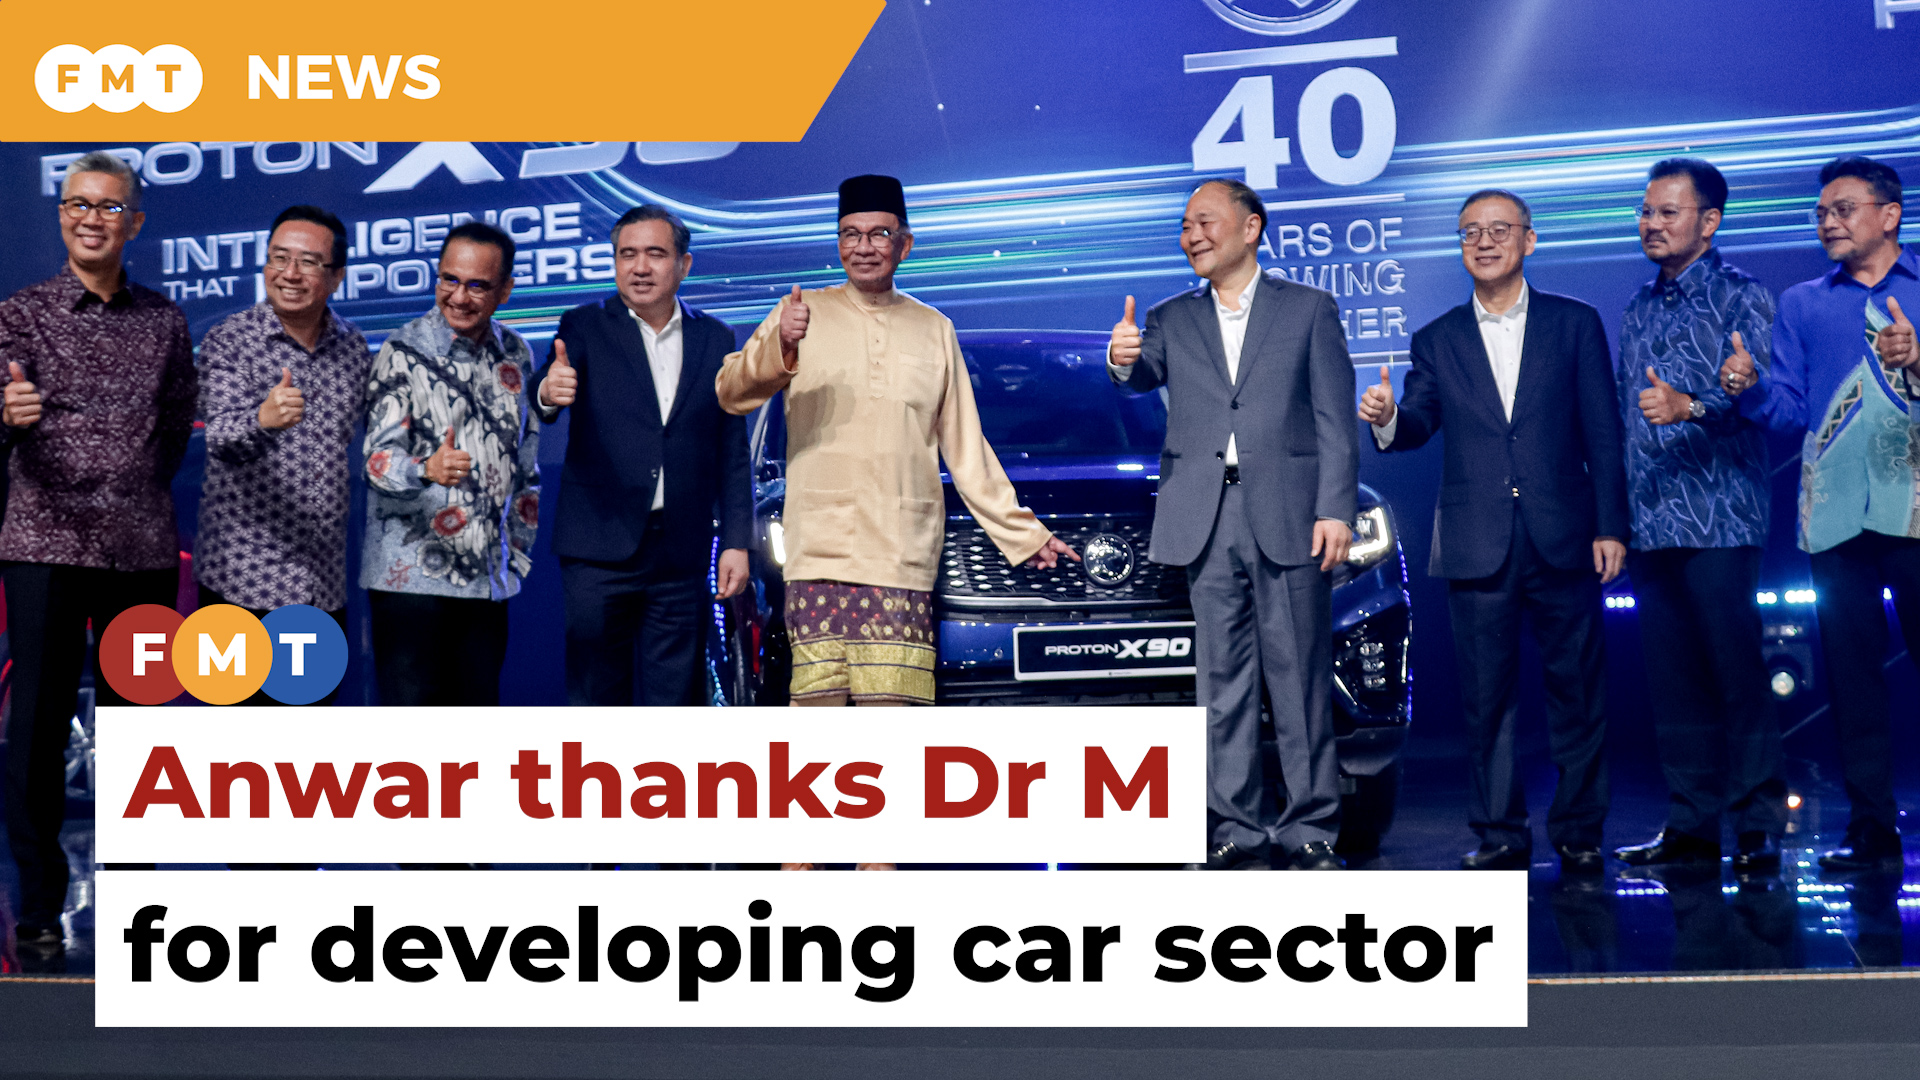 Anwar thanks Dr M for developing car sector